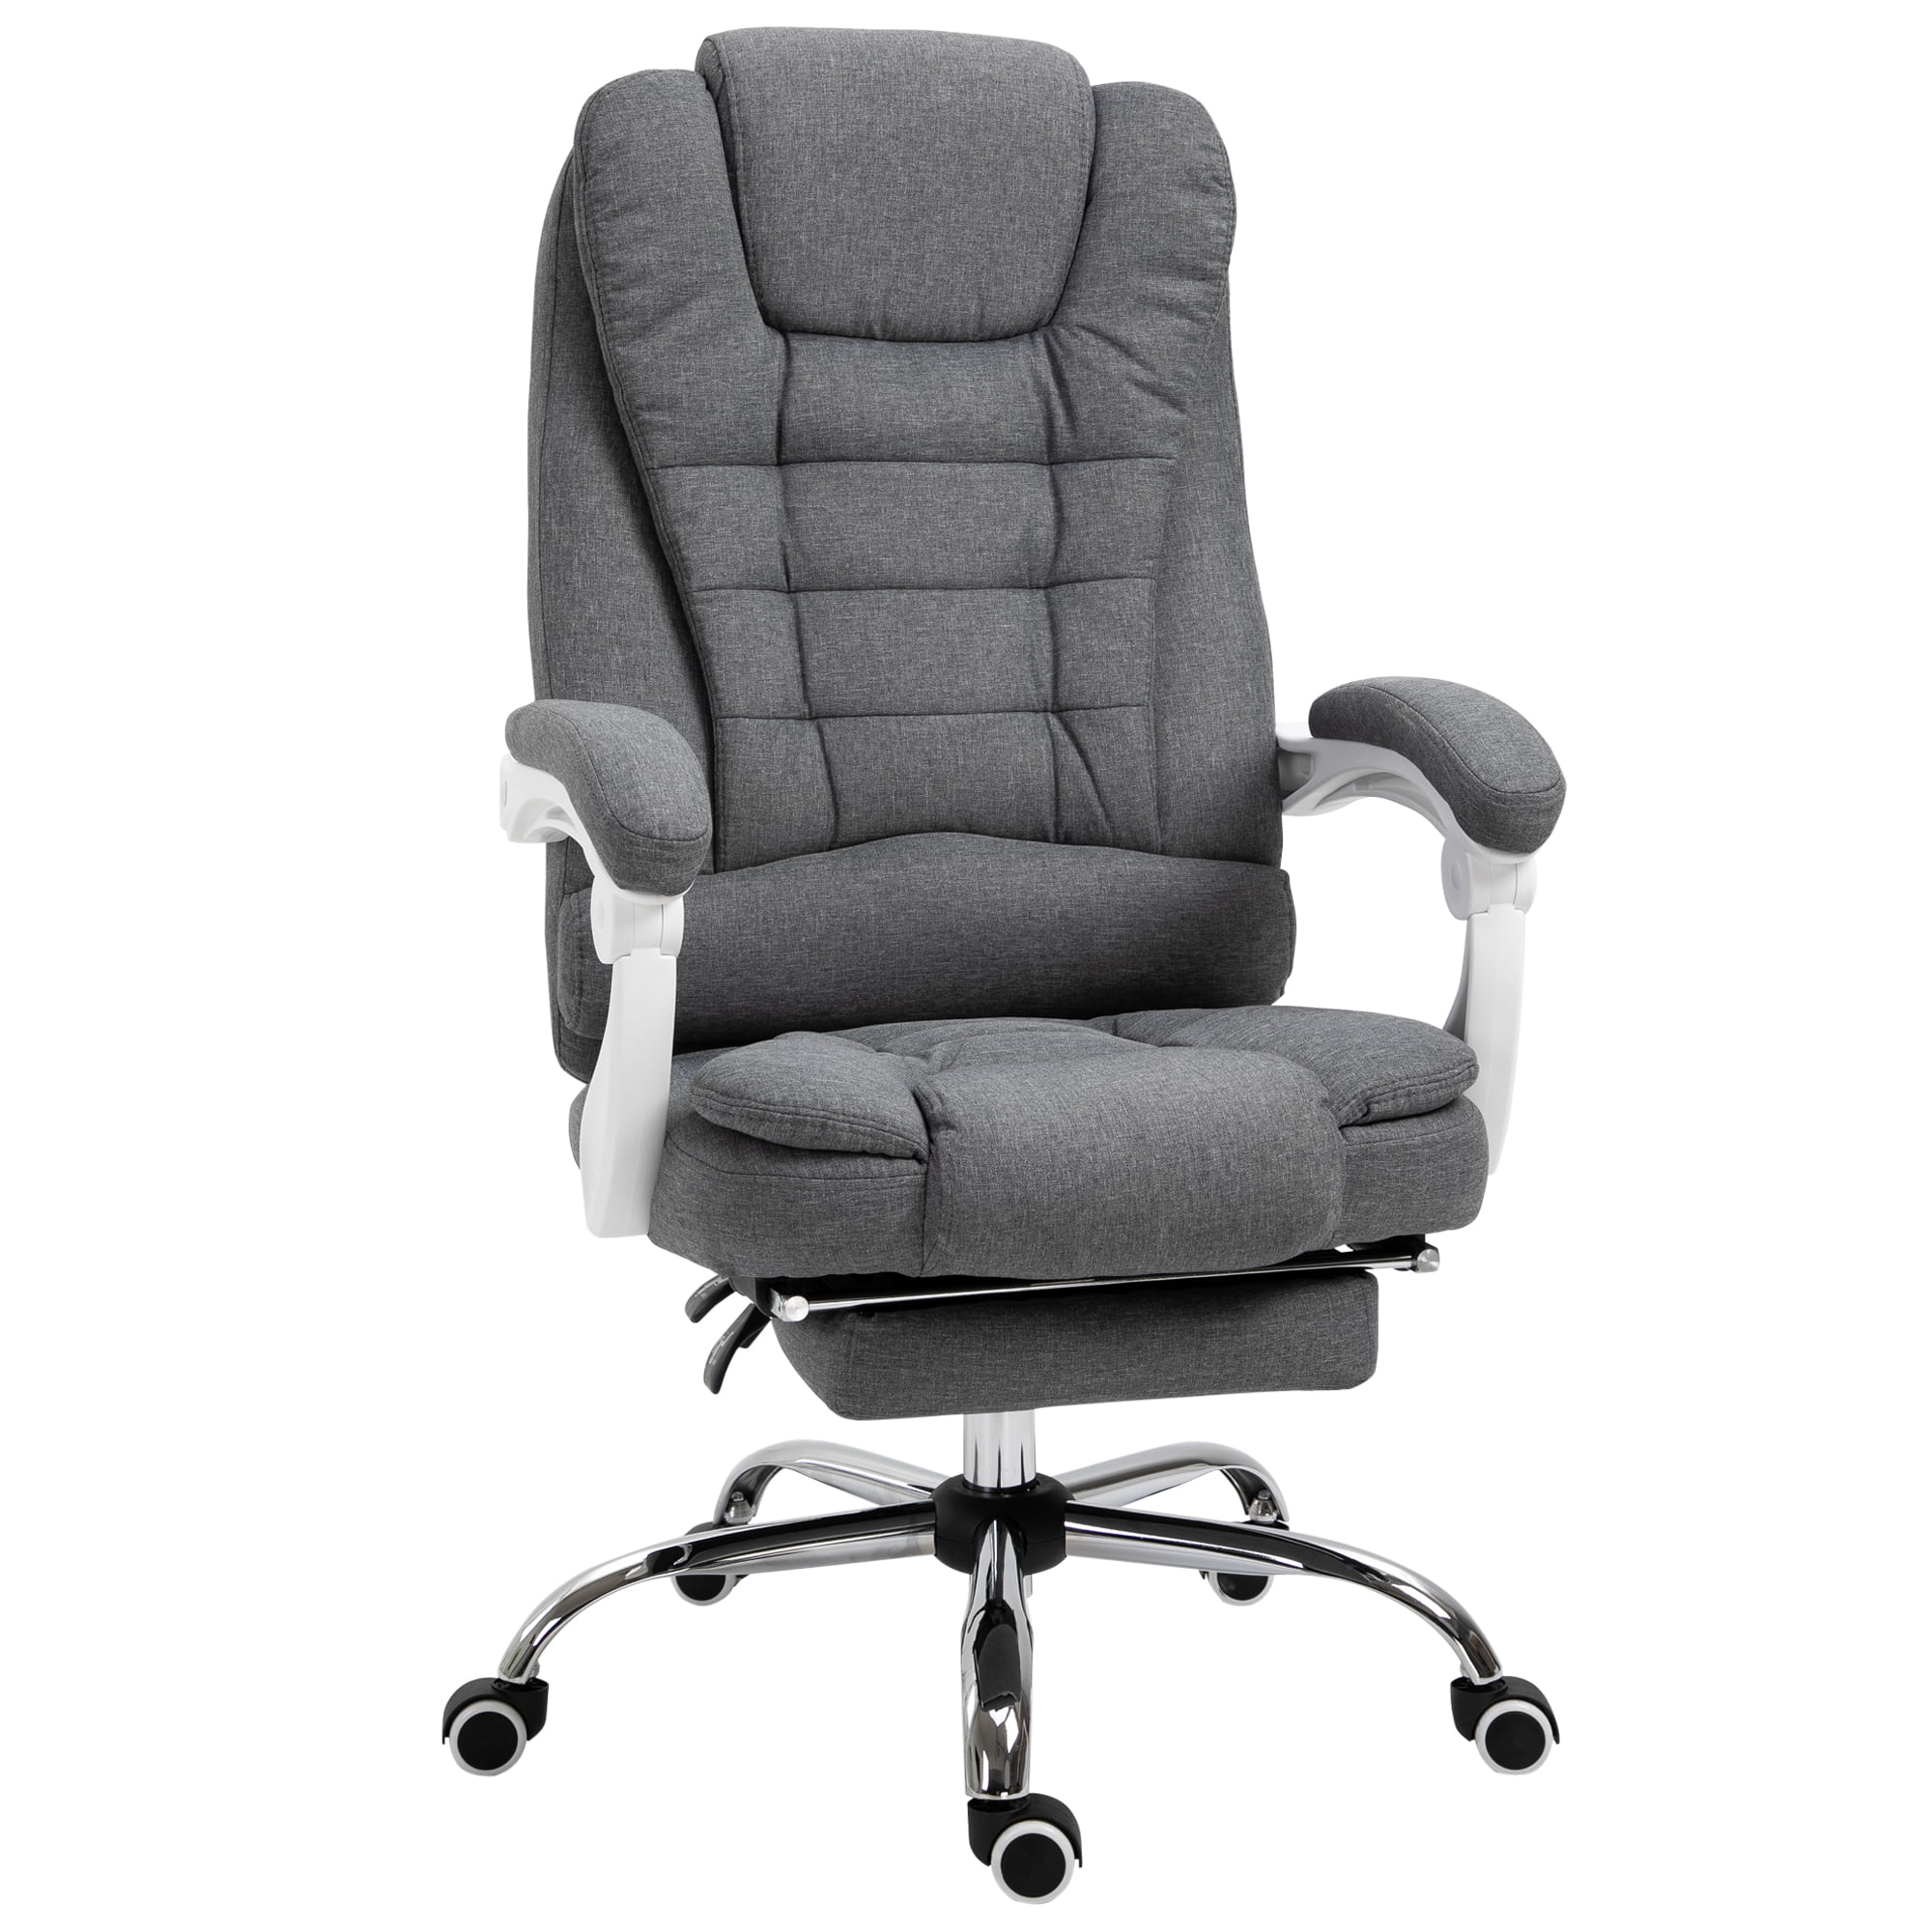  Adjustable Desk Height Chair with Dual Monitor